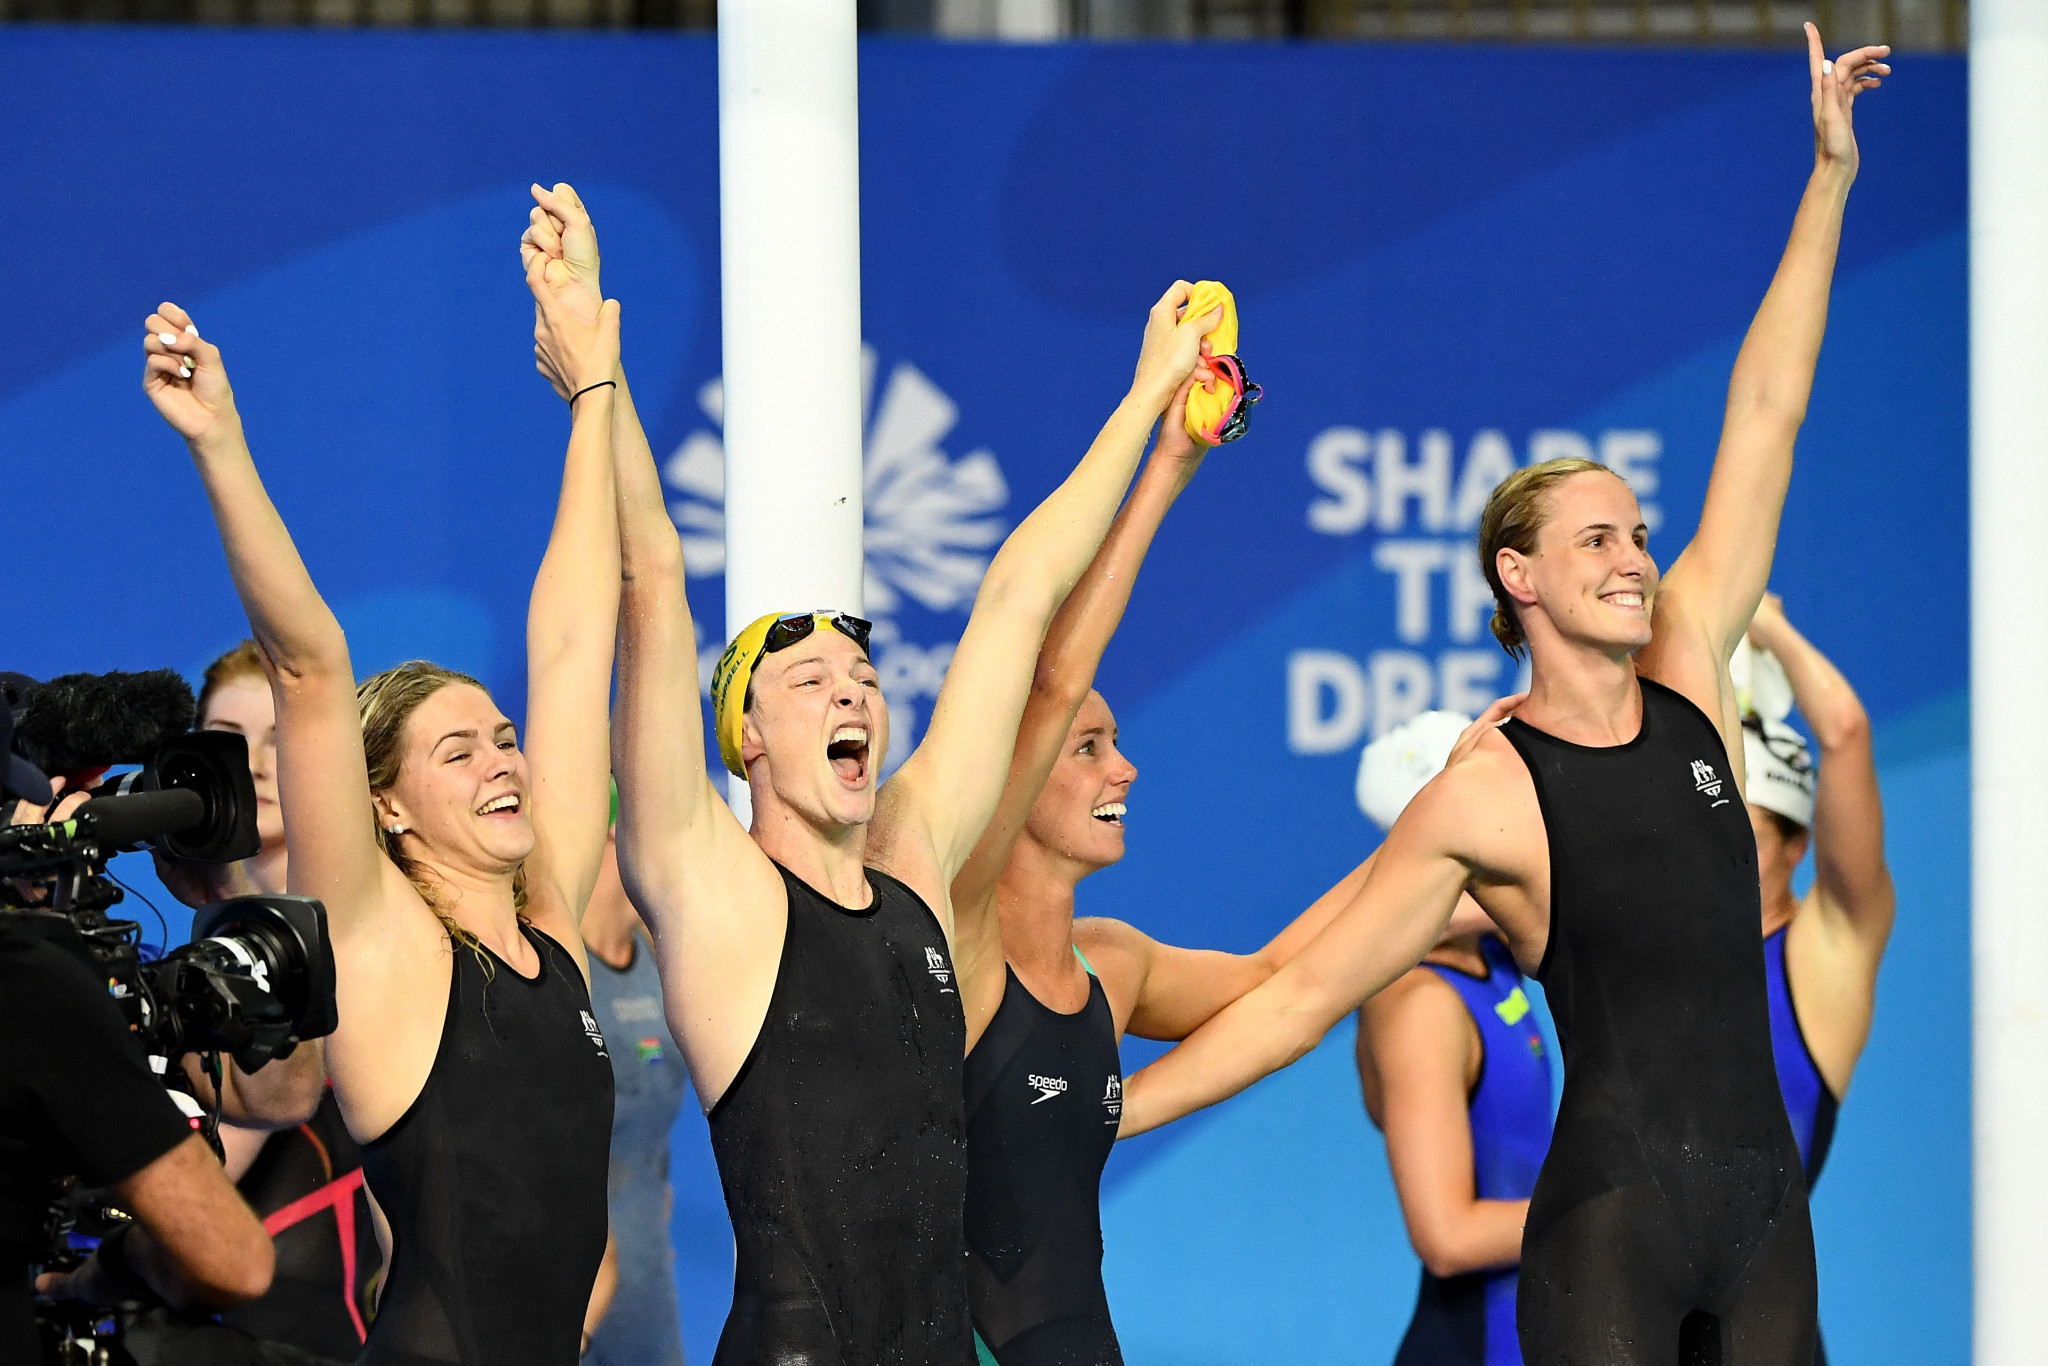 Australia produced a blistering performance to win the women's 4x100m freestyle title ©Getty Images